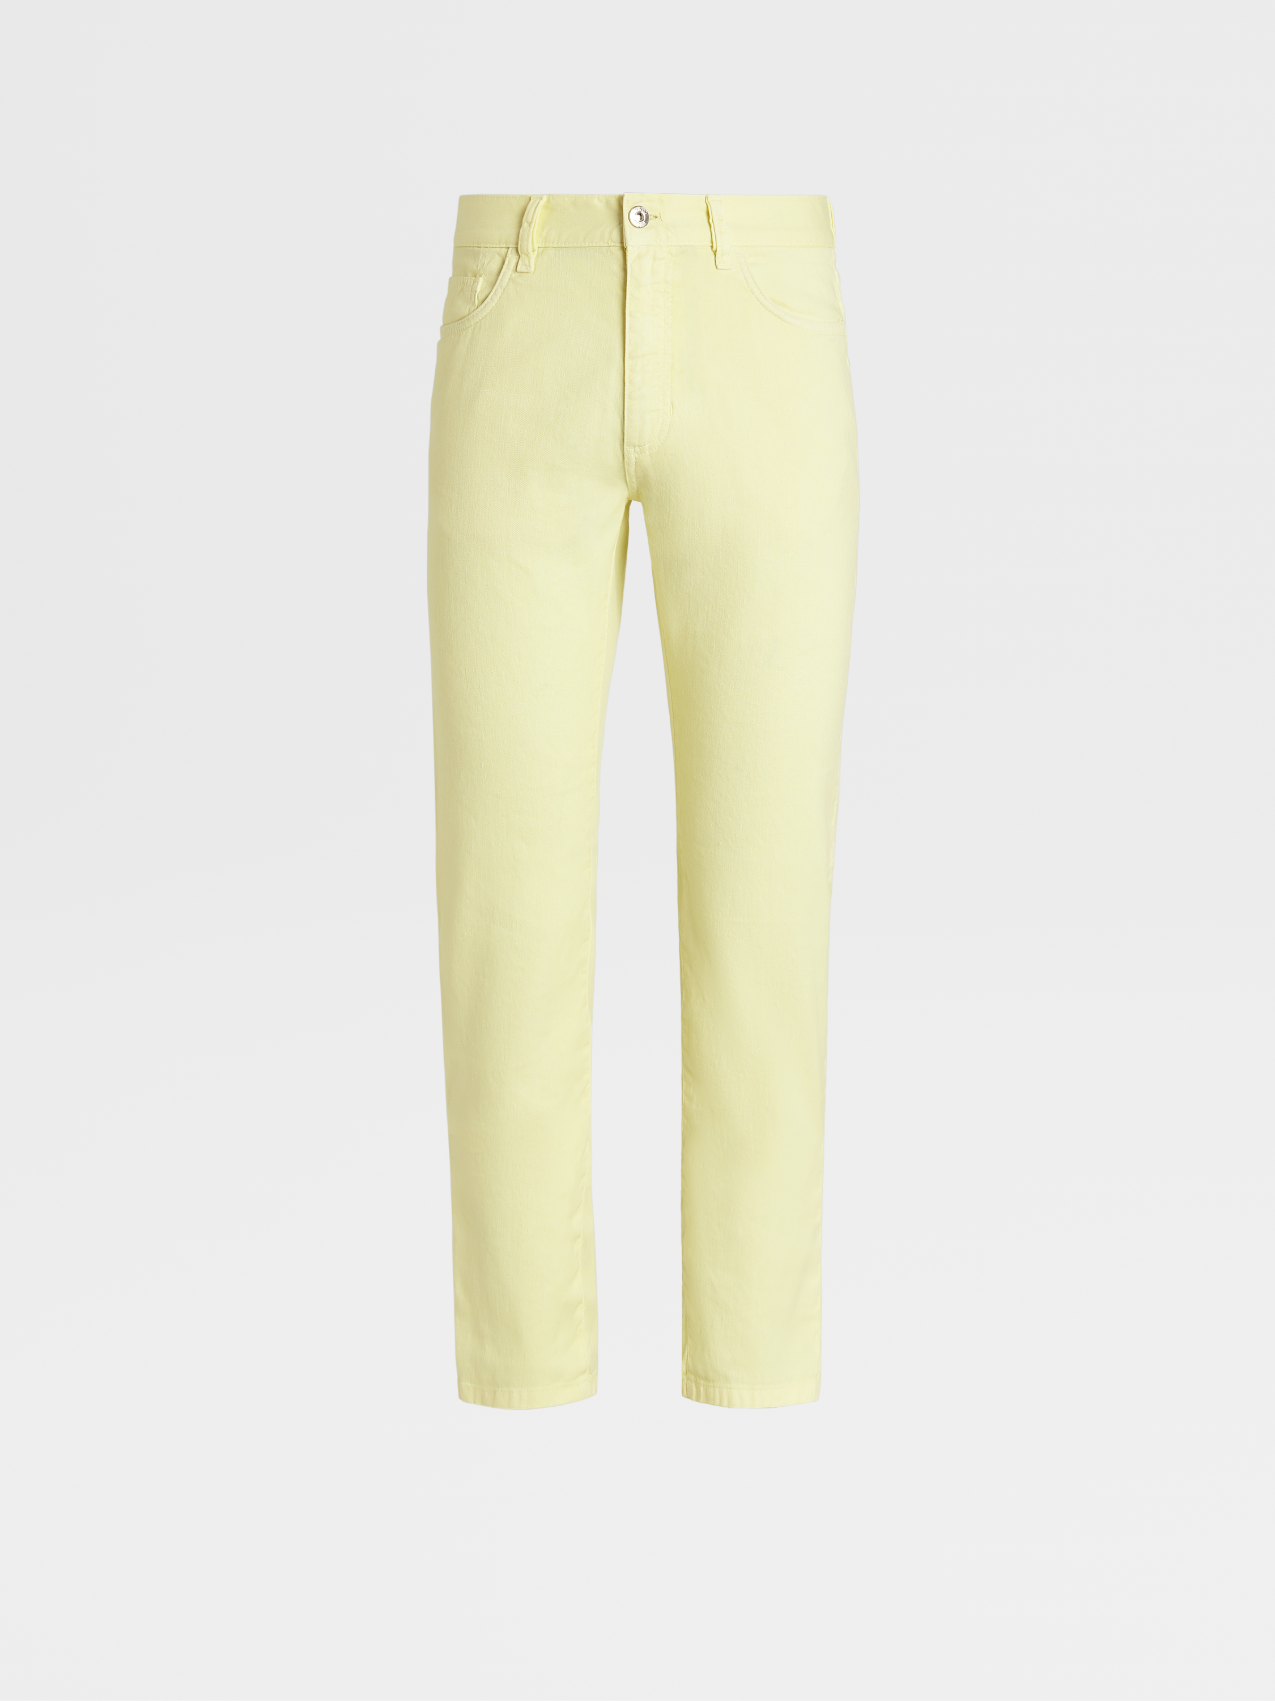 Light Yellow Garment Dyed Stretch Linen and Cotton 5-Pocket Jeans